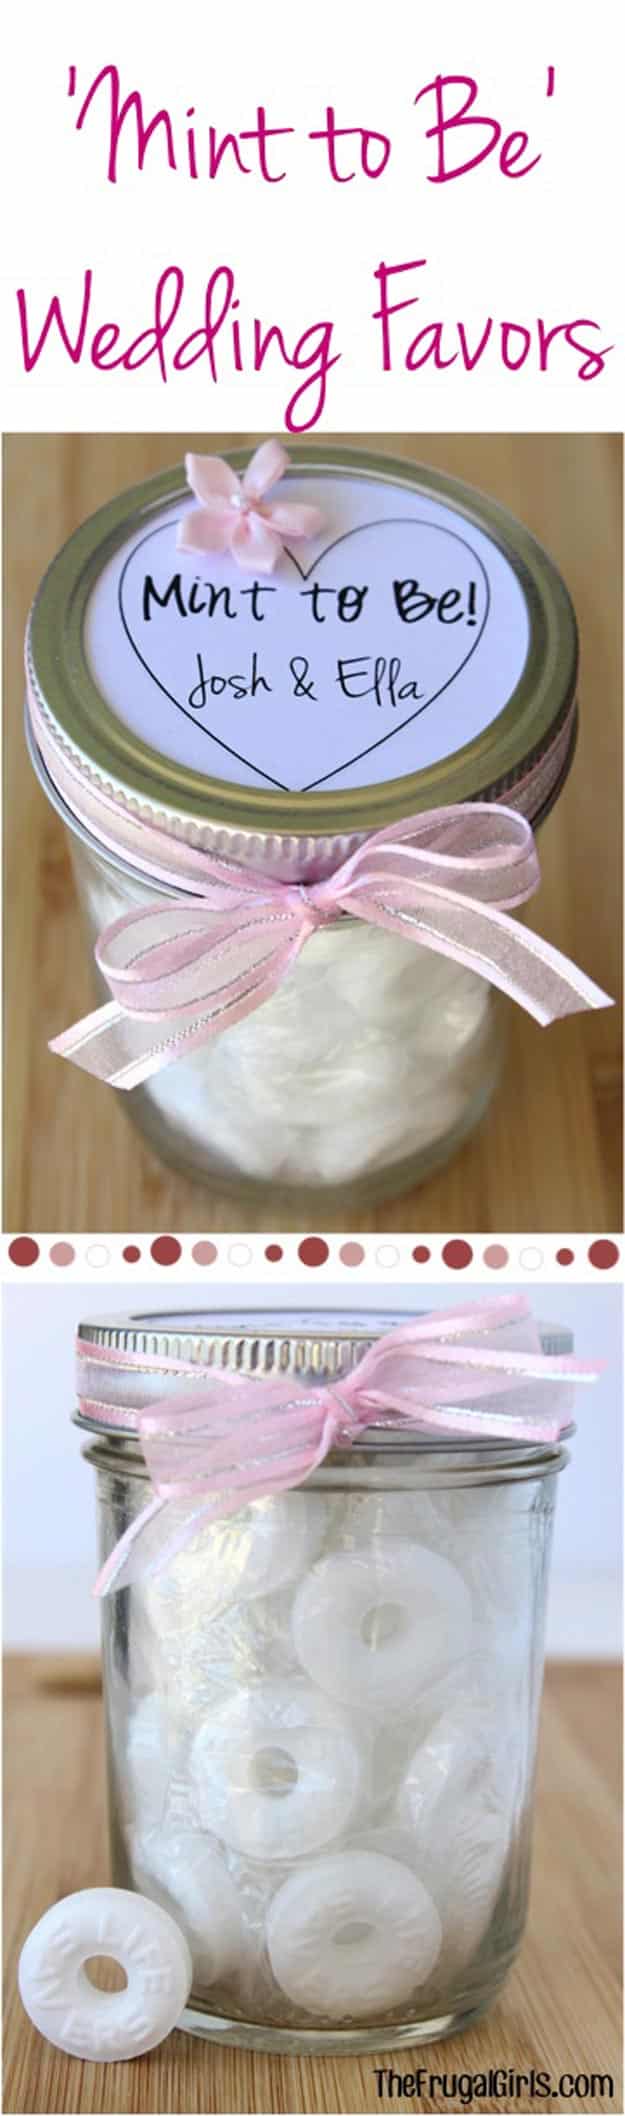 Homemade DIY Gifts in A Jar | Best Mason Jar Cookie Mixes and Recipes, Alcohol Mixers | Fun Gift Ideas for Men, Women, Teens, Kids, Teacher, Mom. Christmas, Holiday, Birthday and Easy Last Minute Gifts | Mint To Be Wedding Favors Gift in a Jar #diy